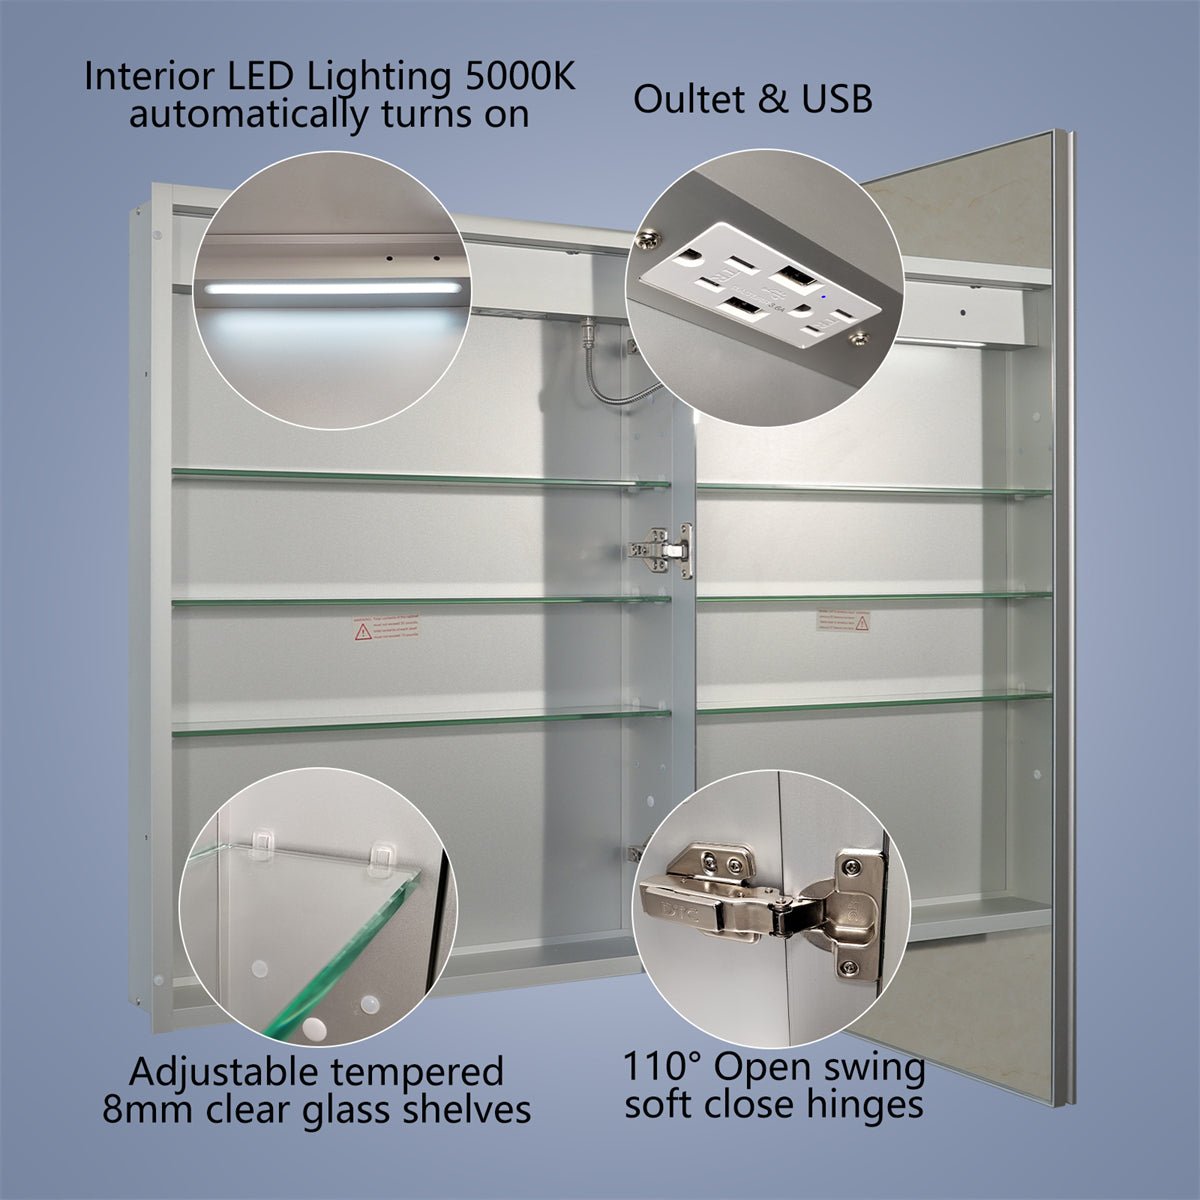 Rim 24" W x 32" H Led Lighted Medicine Cabinet Recessed or Surface with mirrors,Hinge on the right